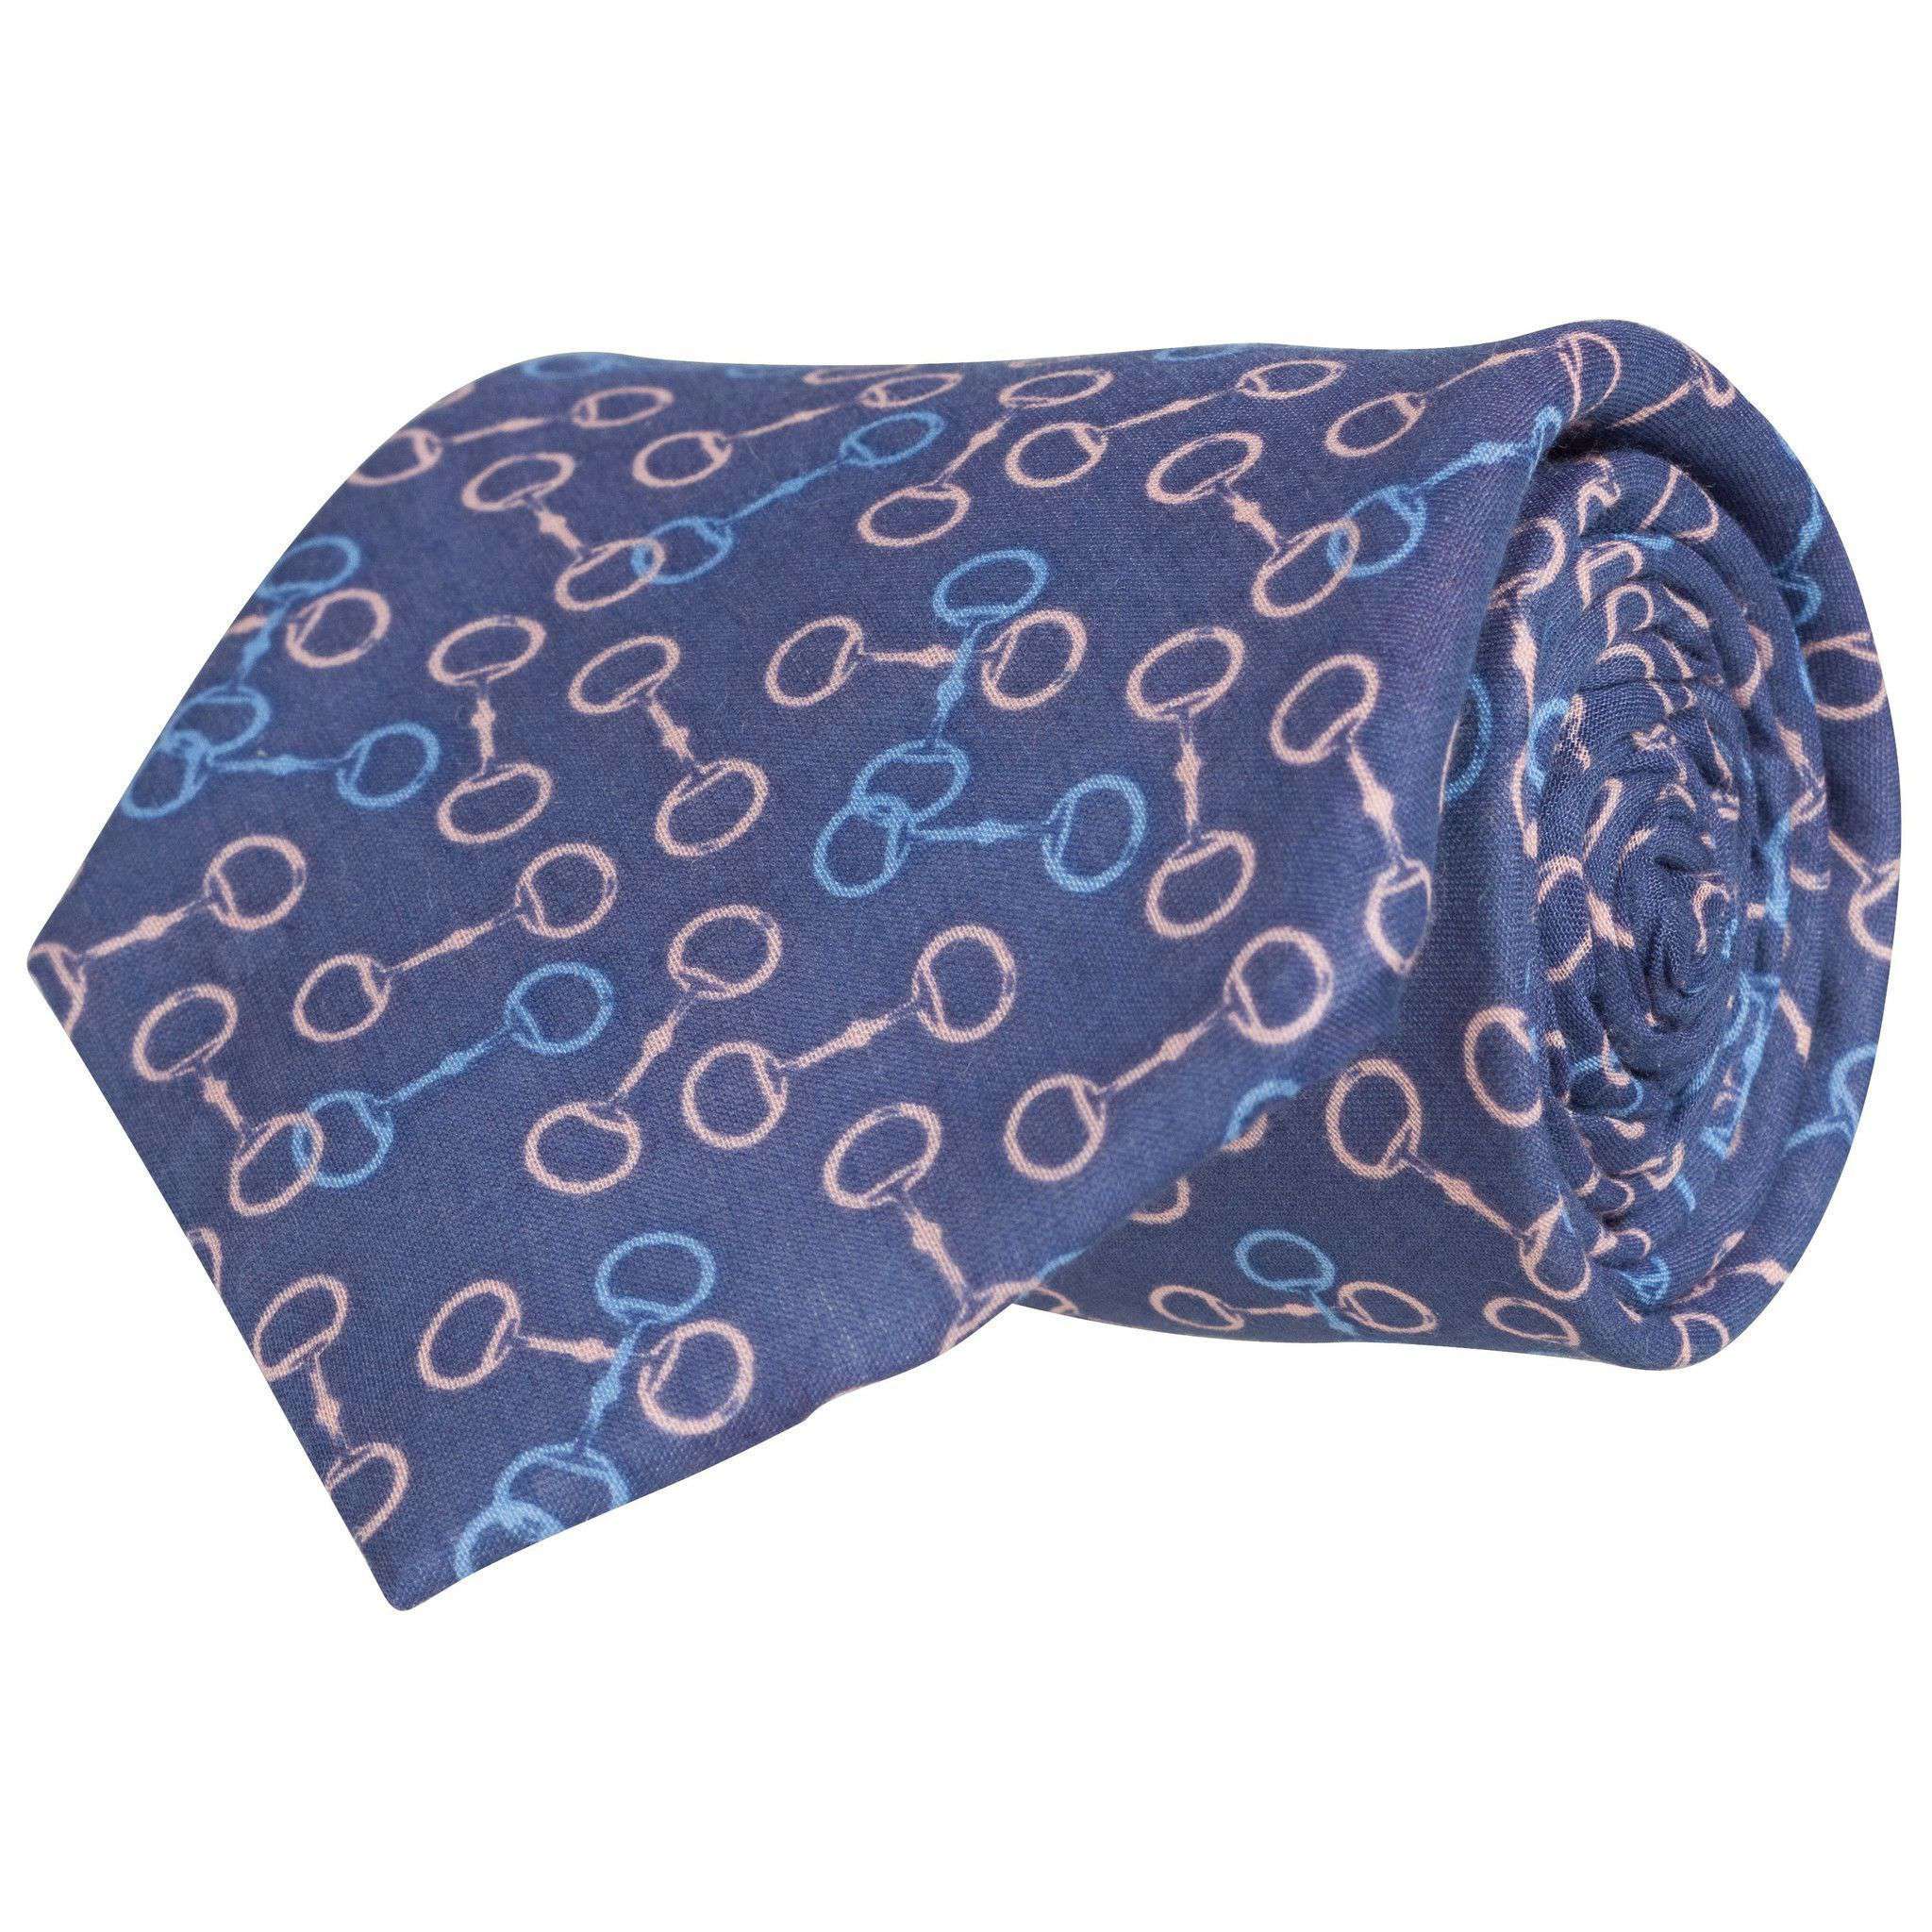 Bit O' Derby Tie in Navy by Southern Proper - Country Club Prep